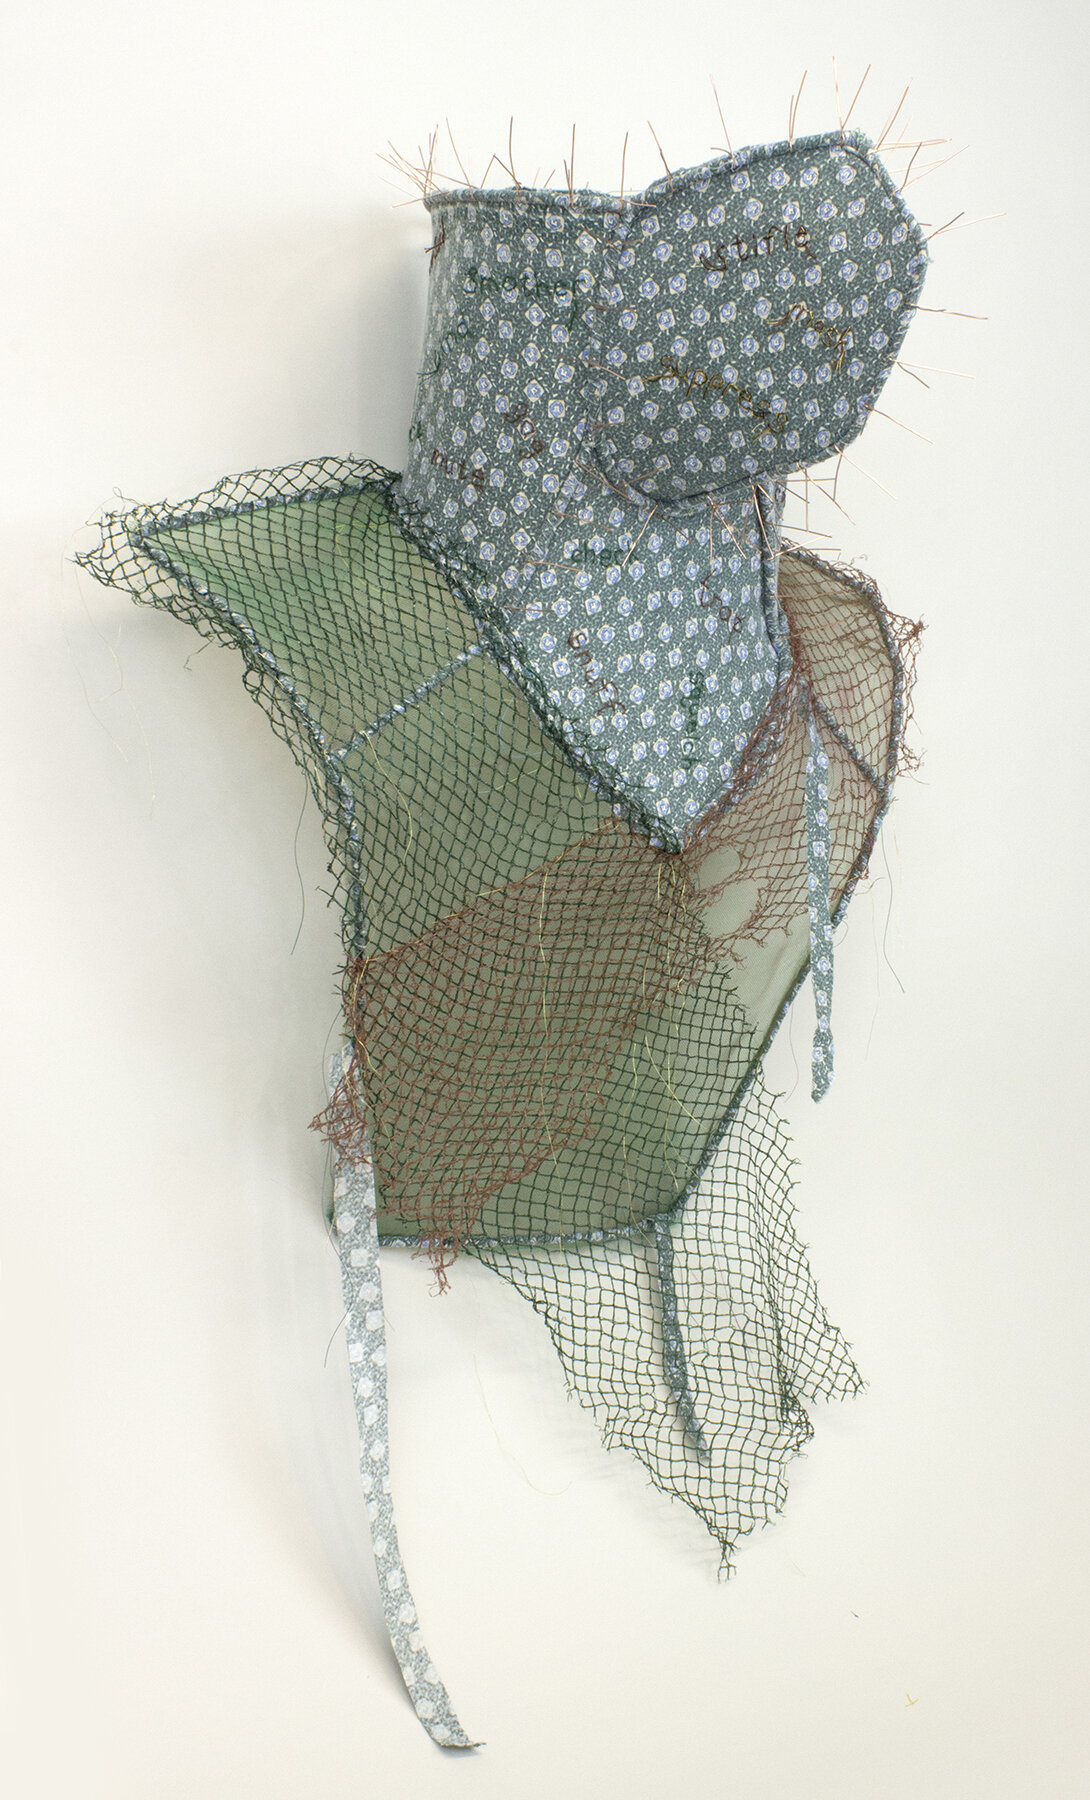    Muffle    reclaimed fabric, vegetable net, thread, copper, 32 x 22 x 14 inches 